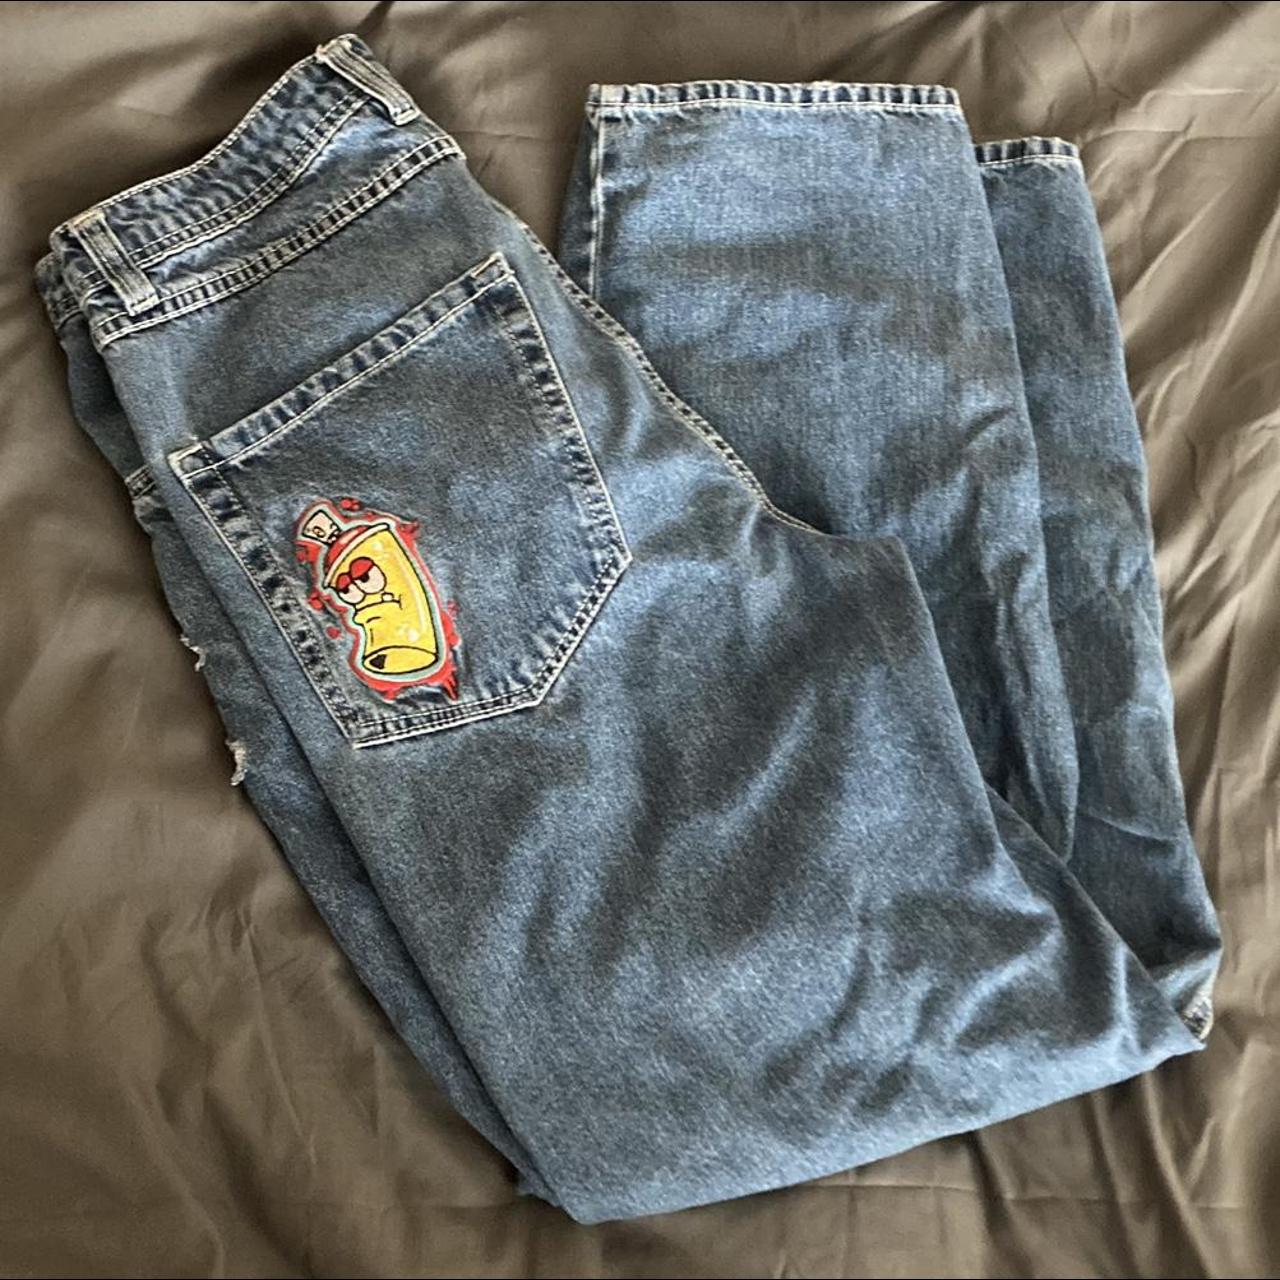 Sick spray paint can embroidery baggy jeans🔥🔥 A few... - Depop